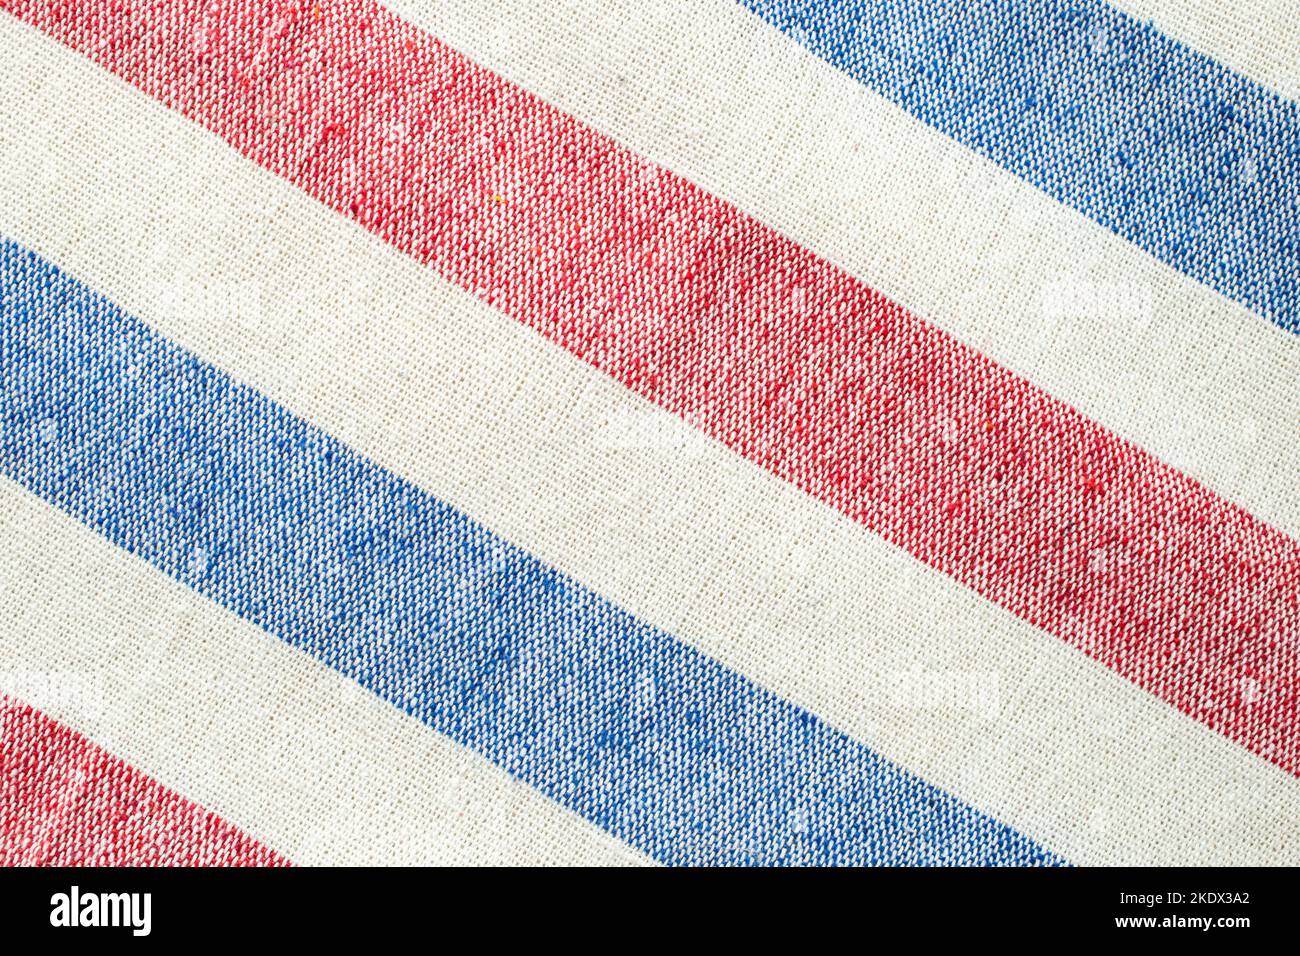 diagonal red, white and blue stripes of a thick fabric canvas, soft focus close up Stock Photo